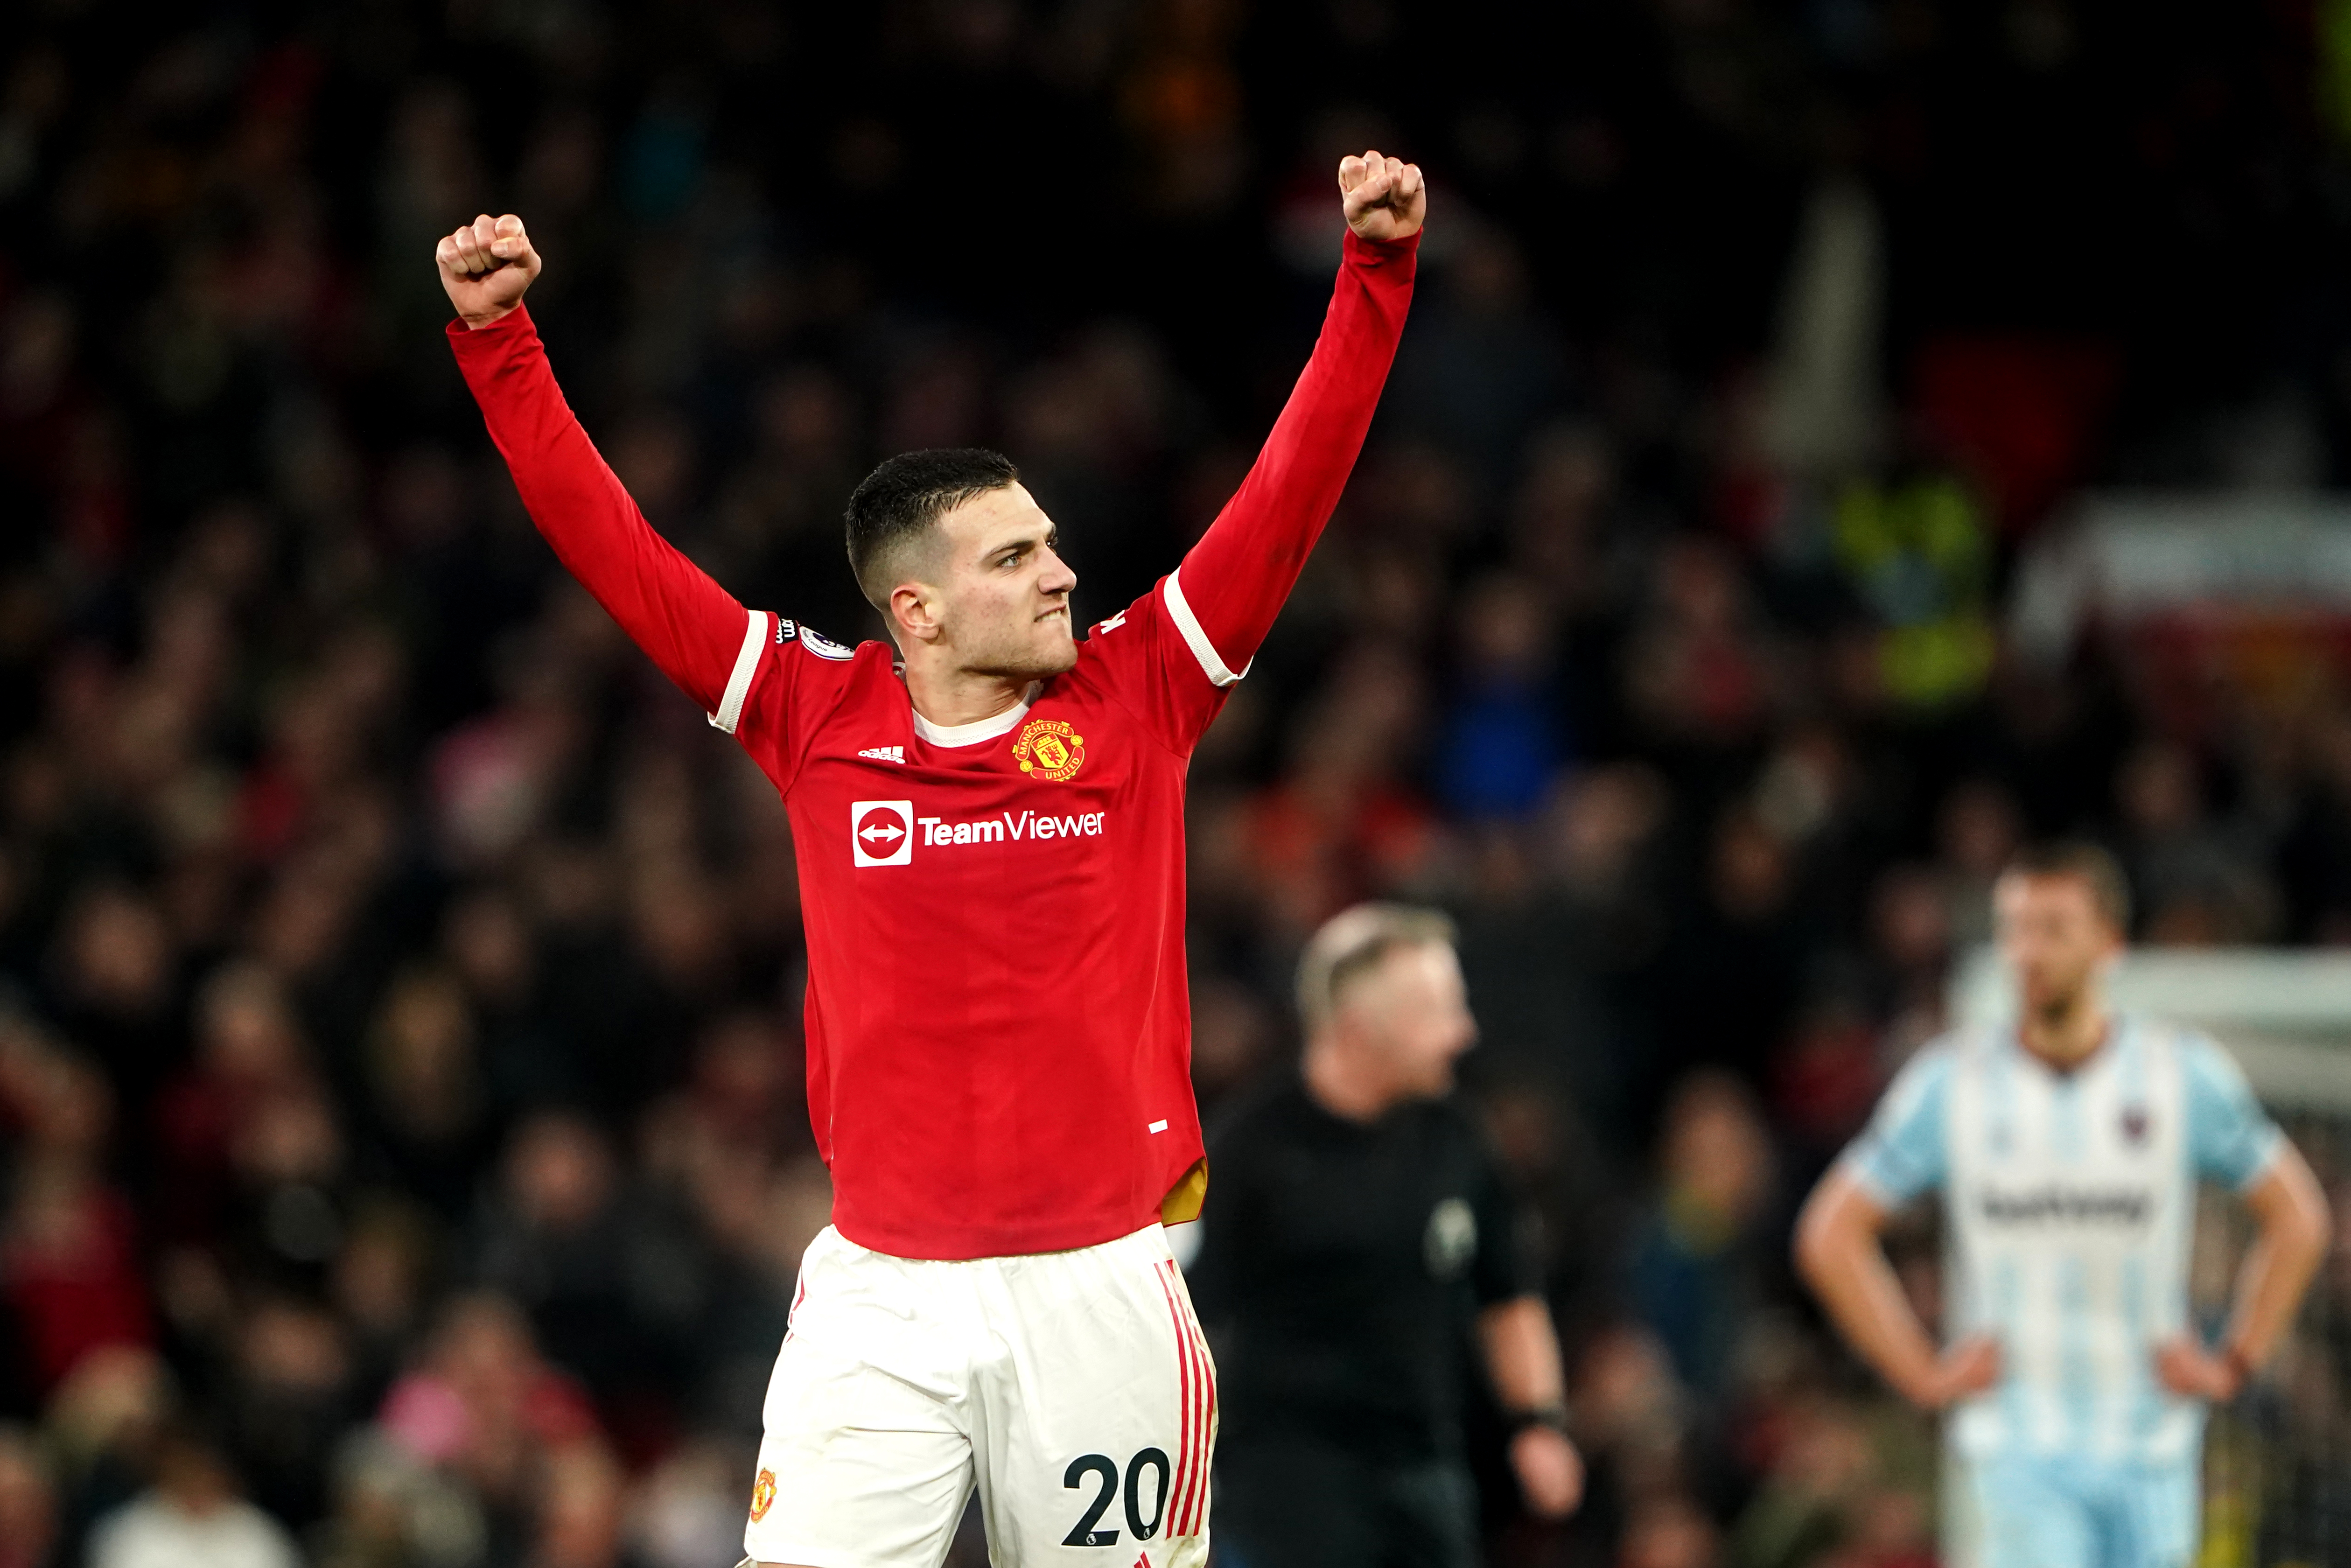 Manchester United’s Diogo Dalot celebrates during the Premier League match at Old Trafford, Manchester. Picture date: Saturday January 22, 2022